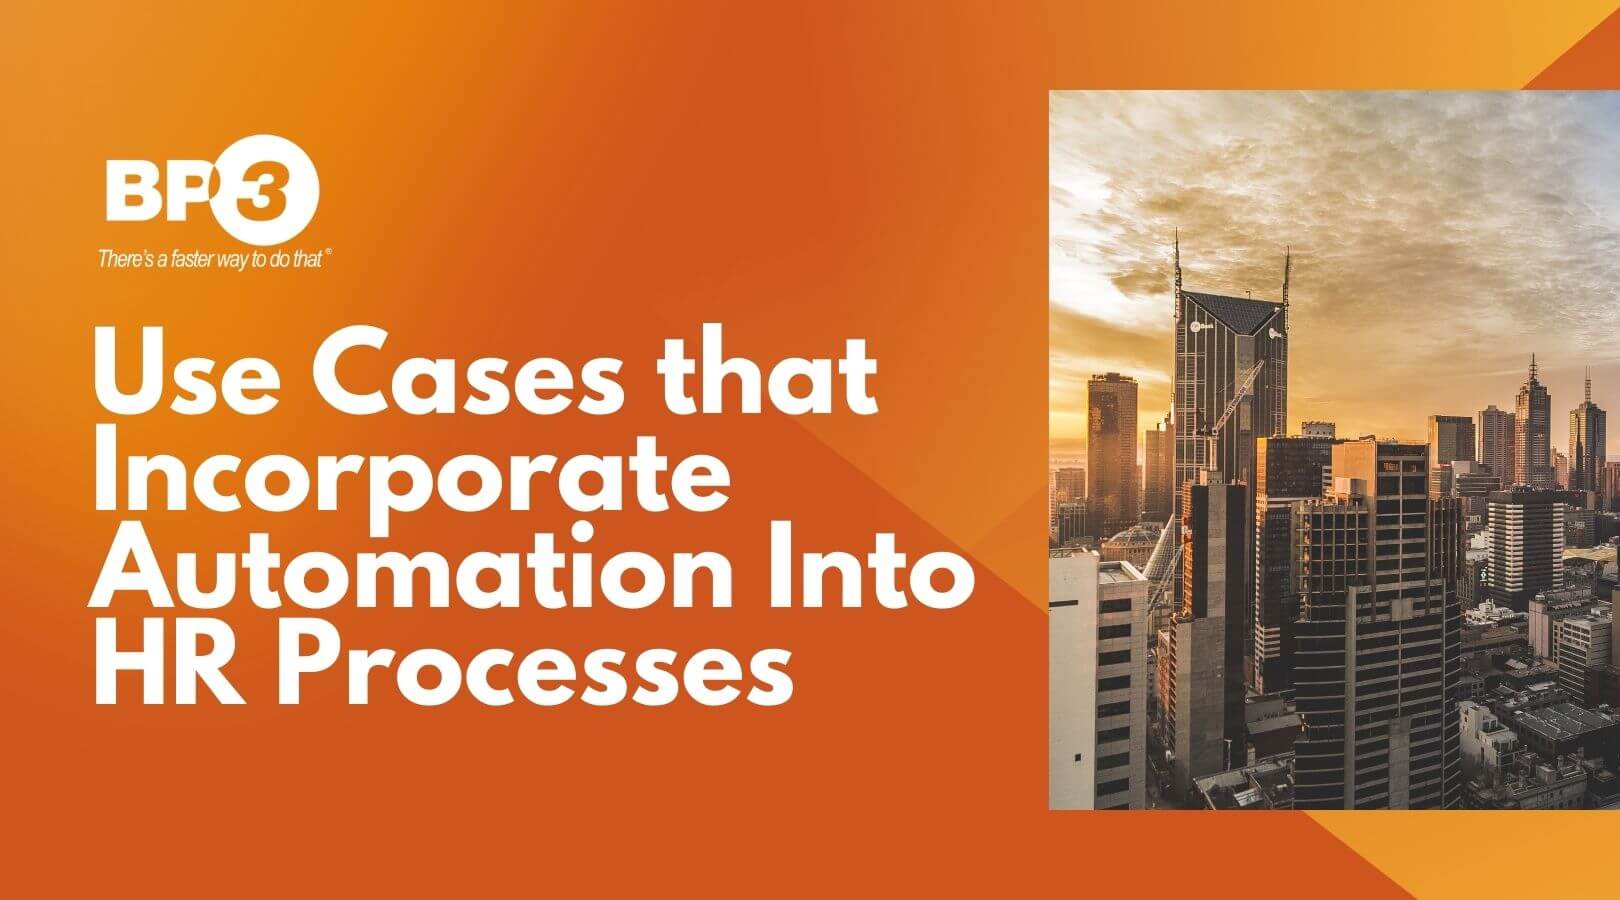 Use Cases that Incorporate Automation Into HR Processes